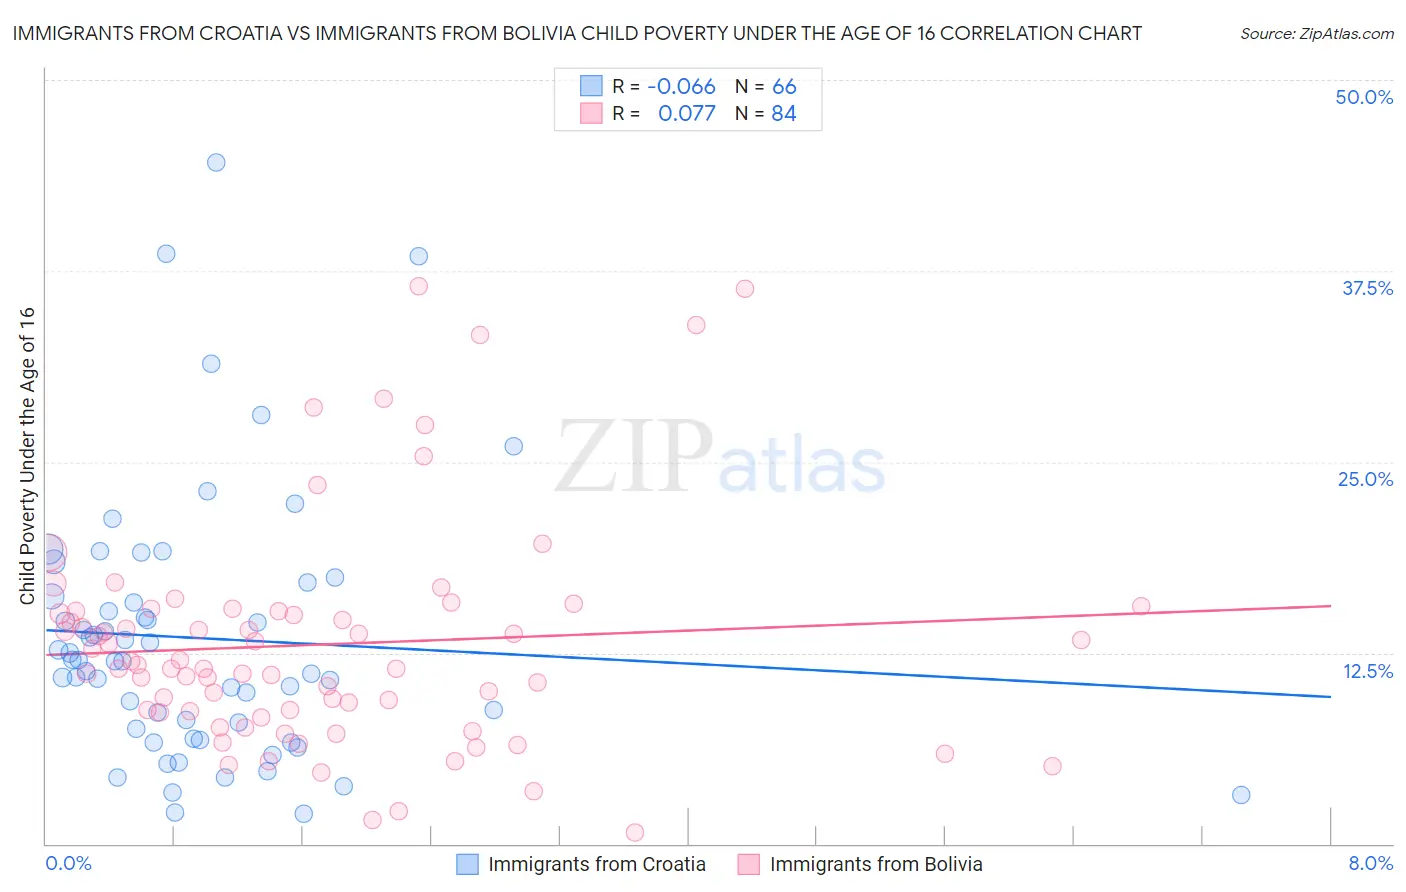 Immigrants from Croatia vs Immigrants from Bolivia Child Poverty Under the Age of 16